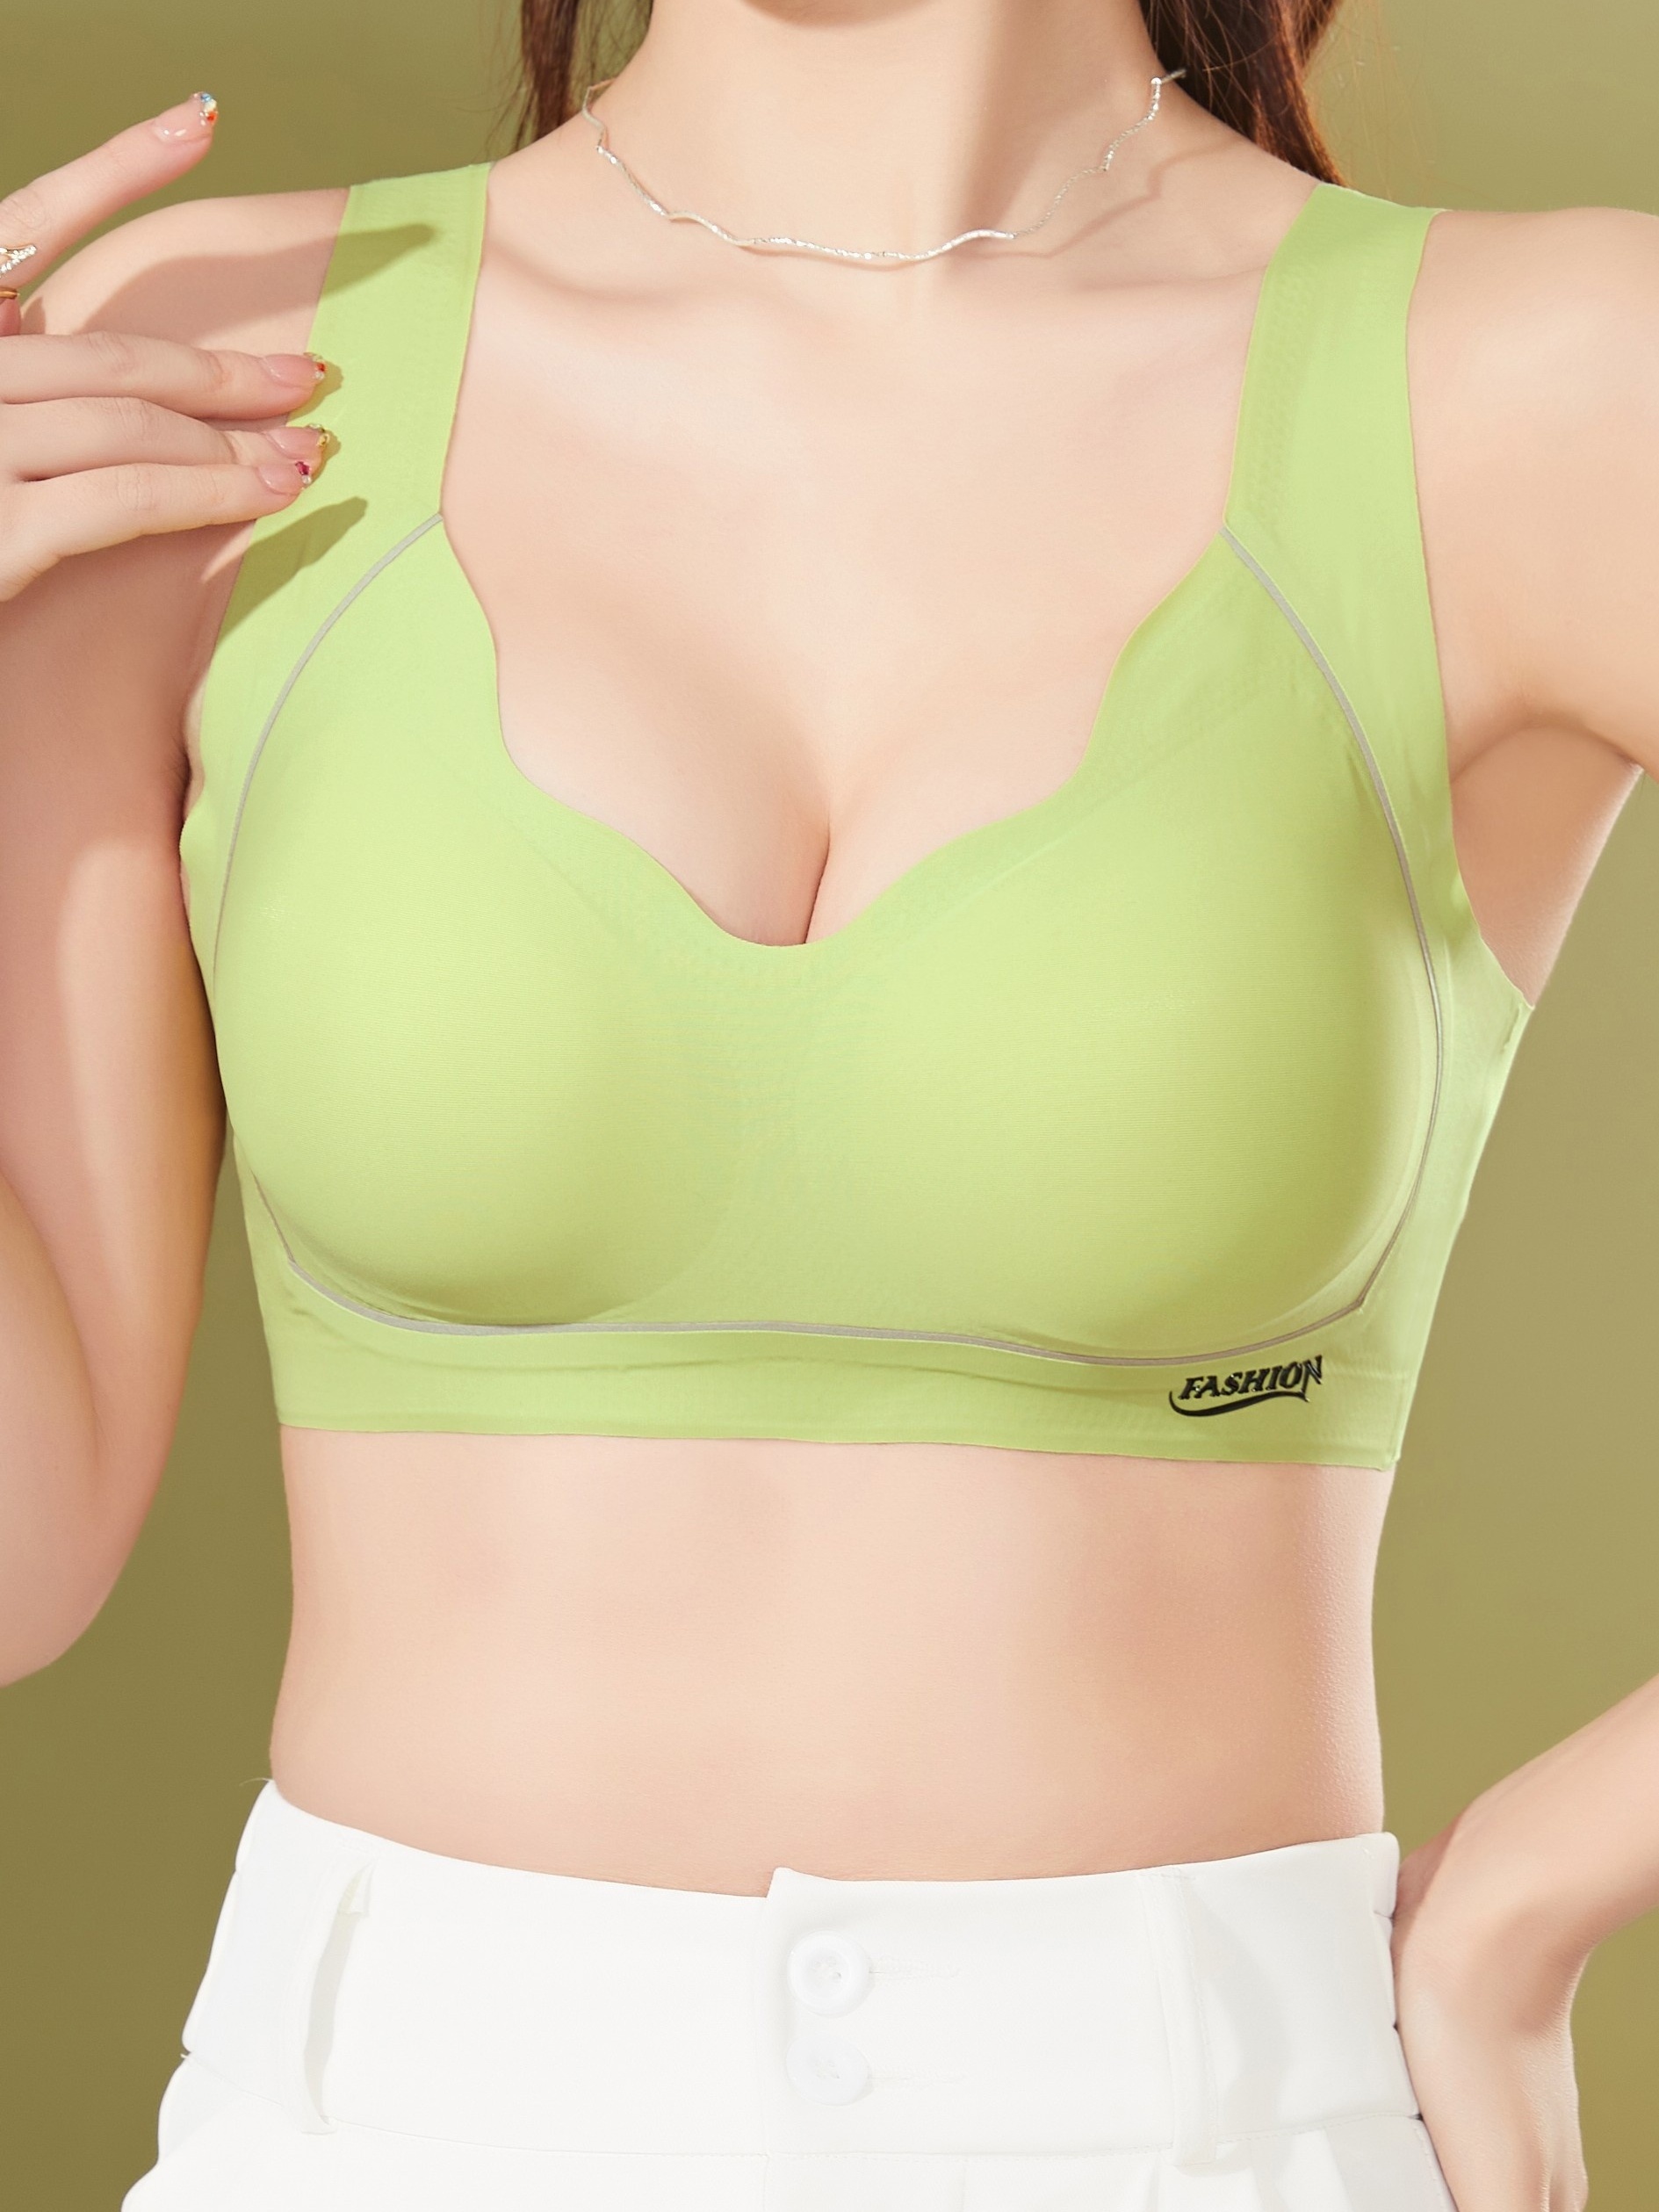 Women's Daily Wear Bra: Gather, Support, Breathable, Comfortable, Seamless  Underwear